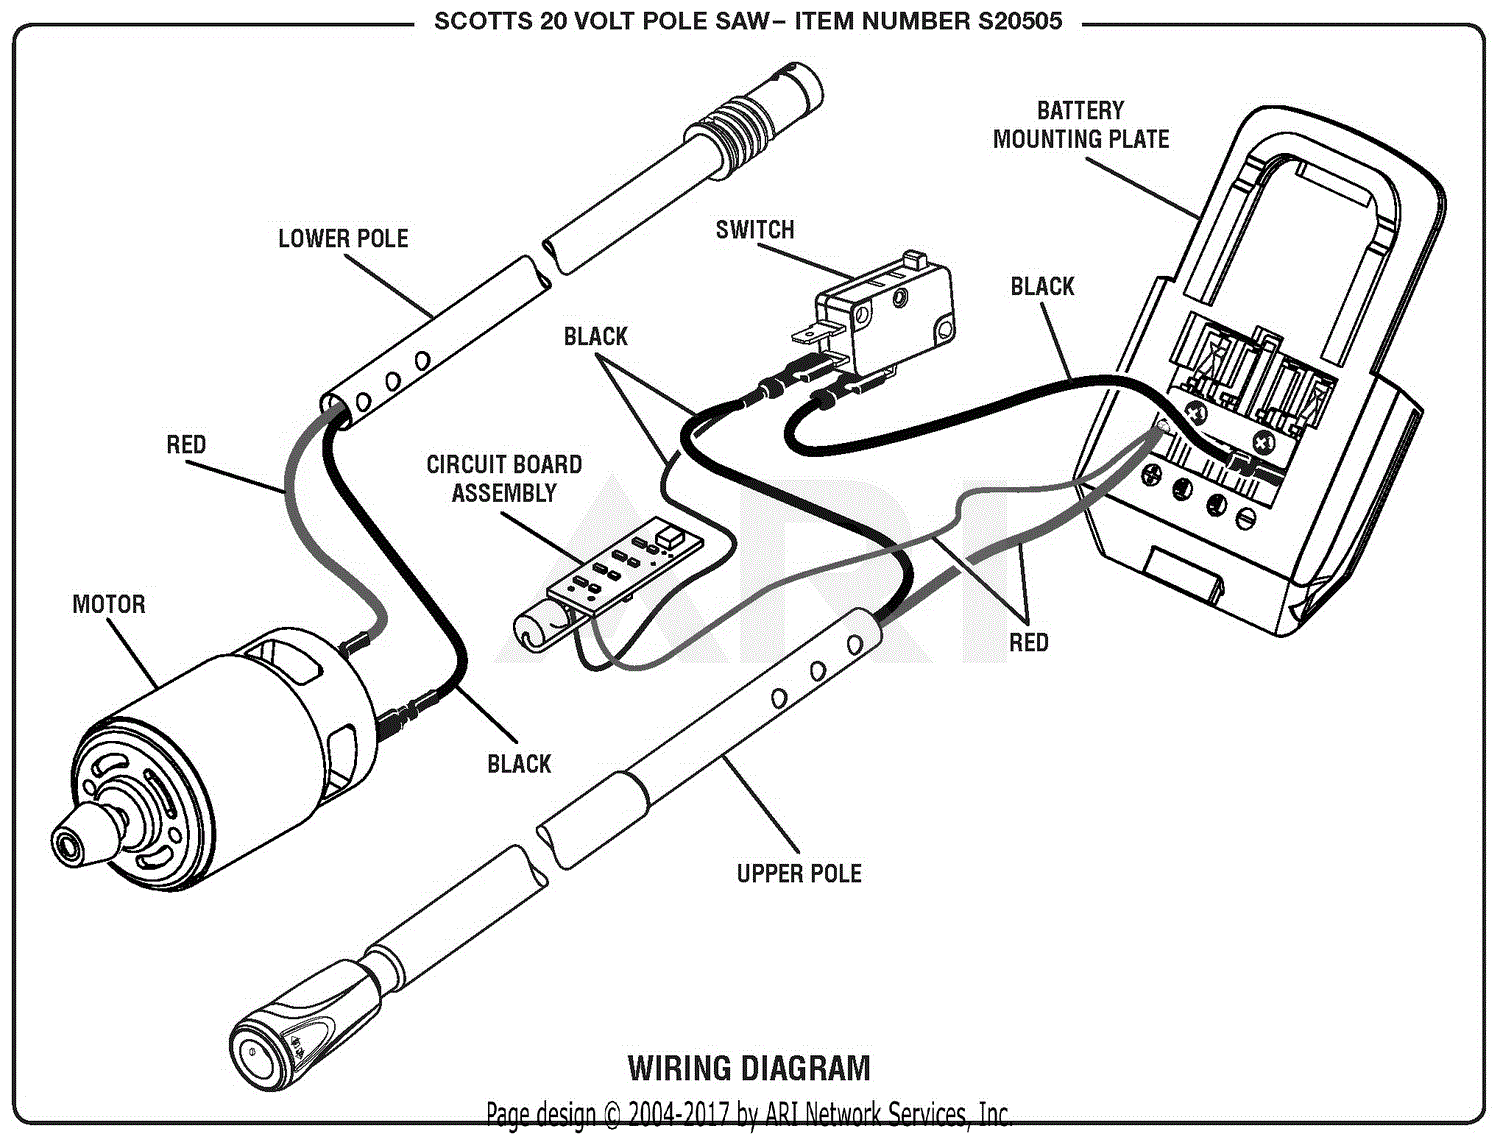 Homelite S20505 20 Volt Pole Saw Parts Diagram For Wiring